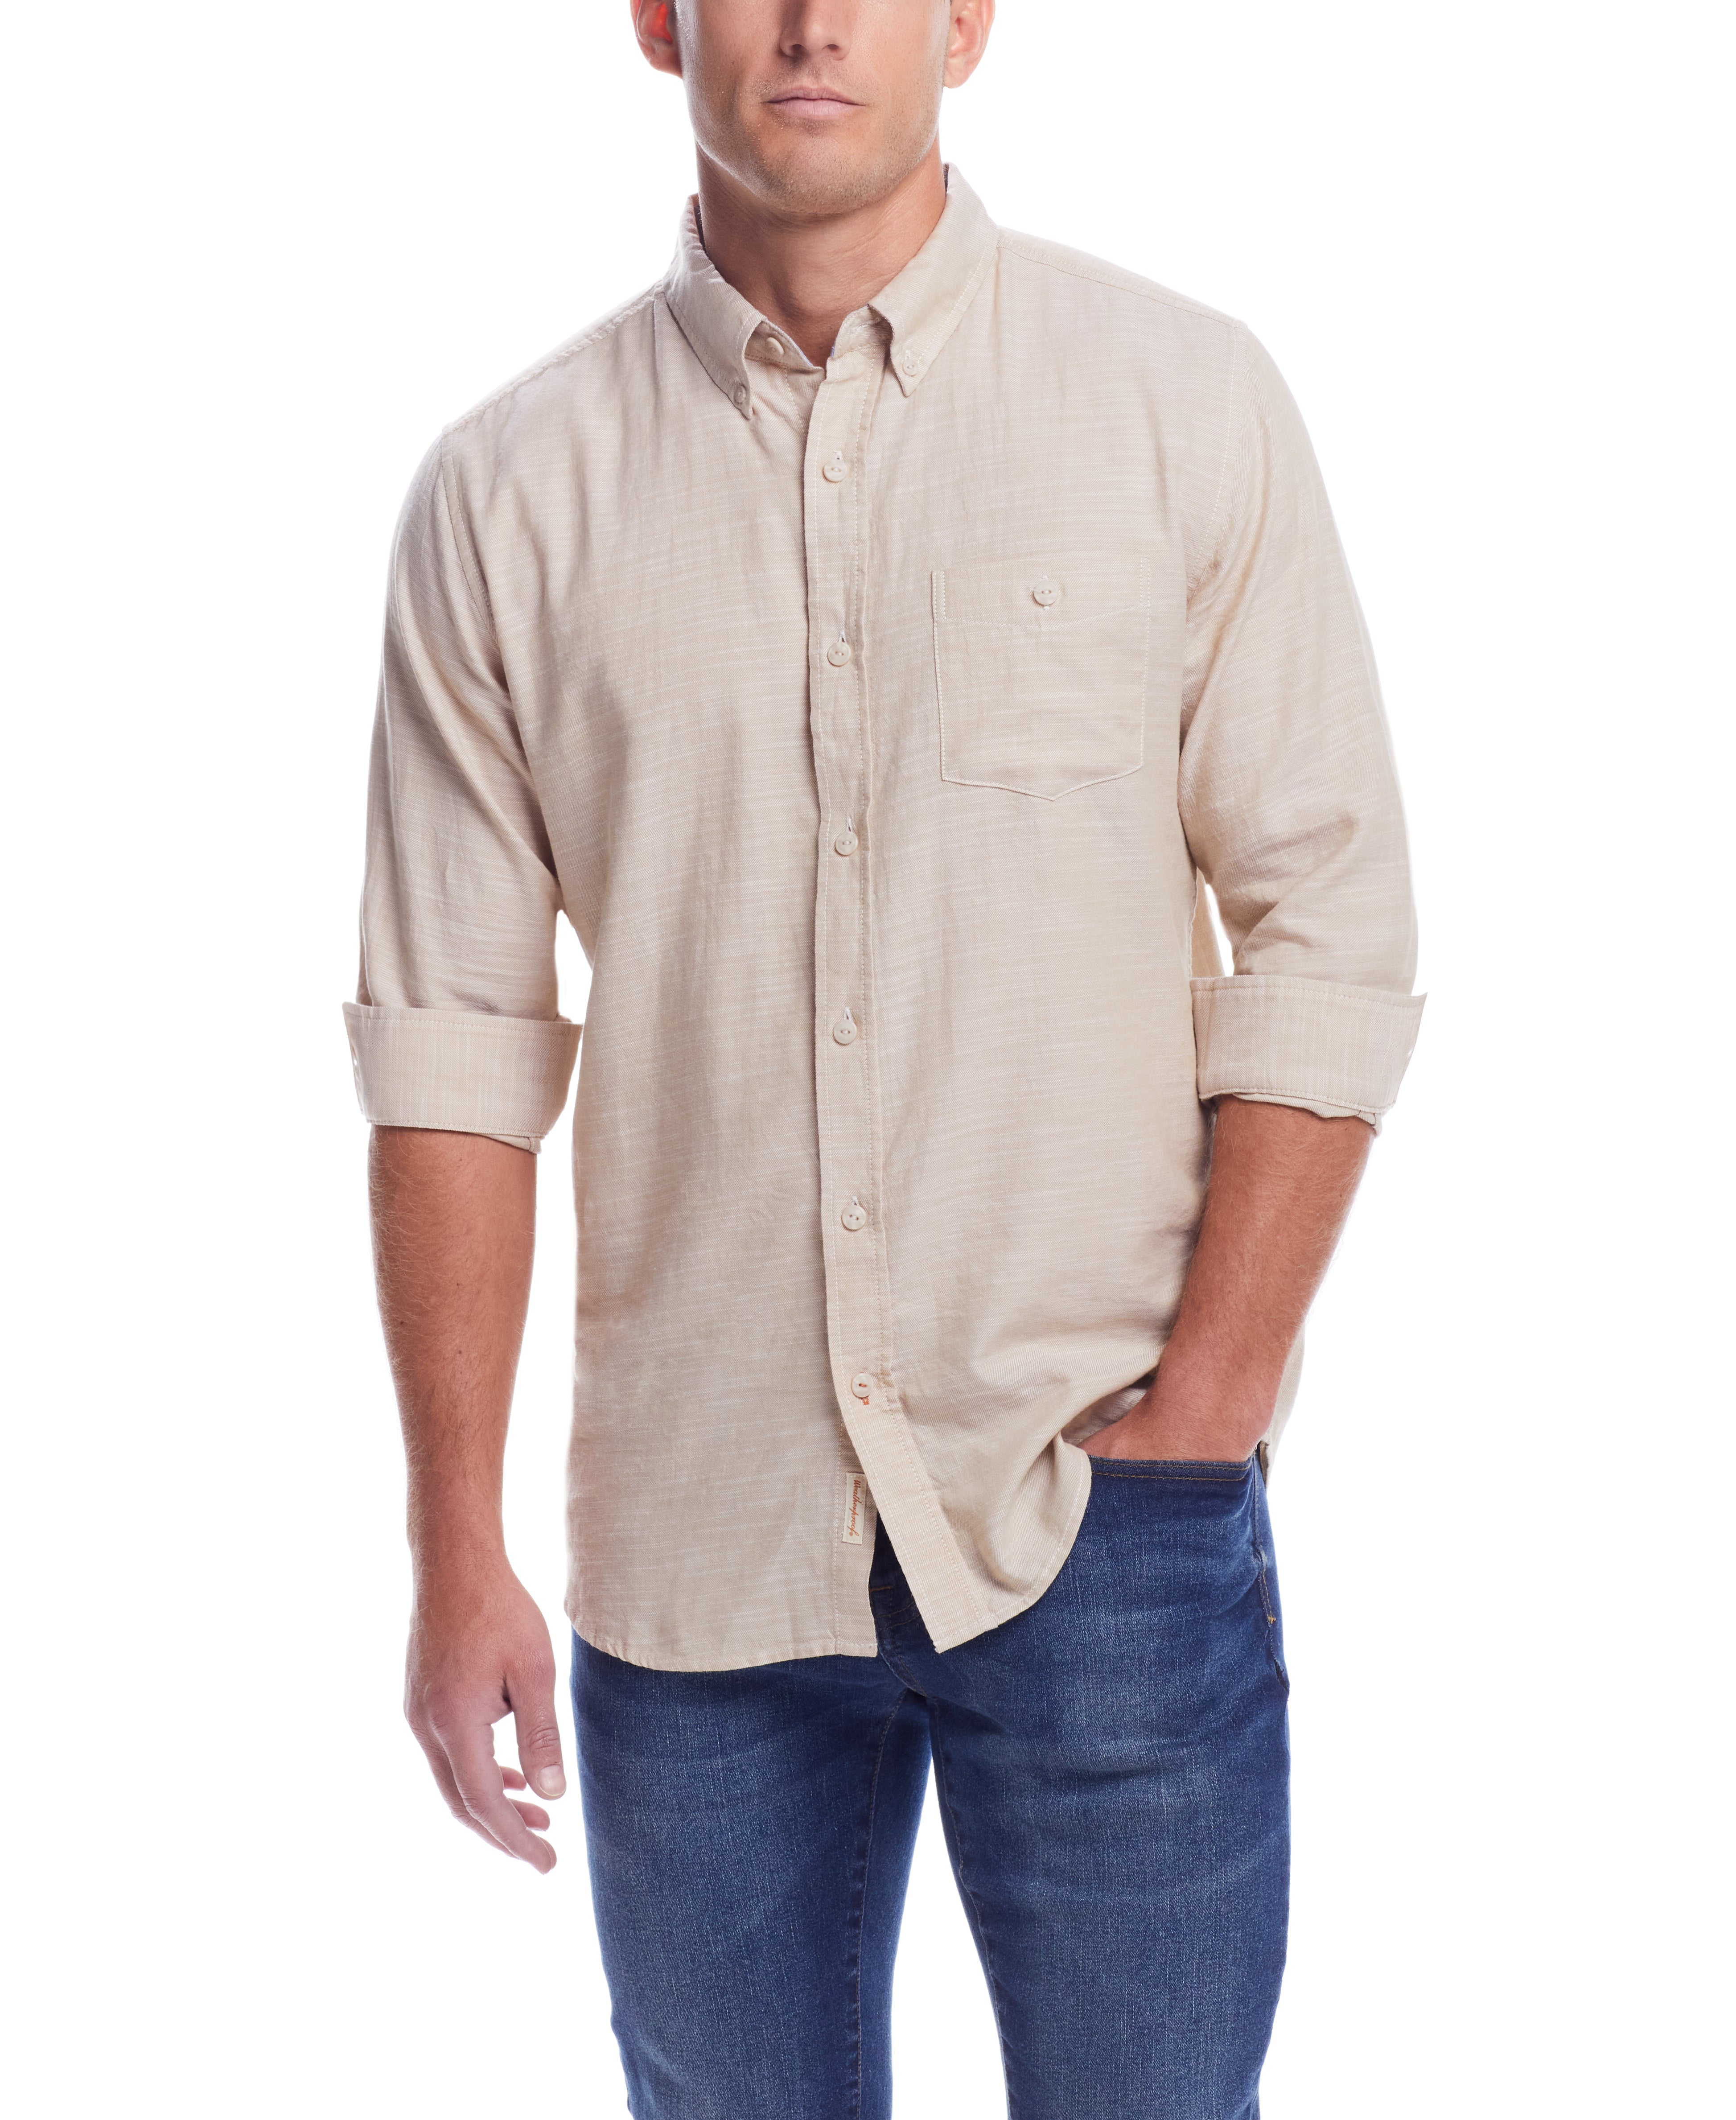 LONG SLEEVE SOLID COTTON TWILL SHIRT in STARFISH